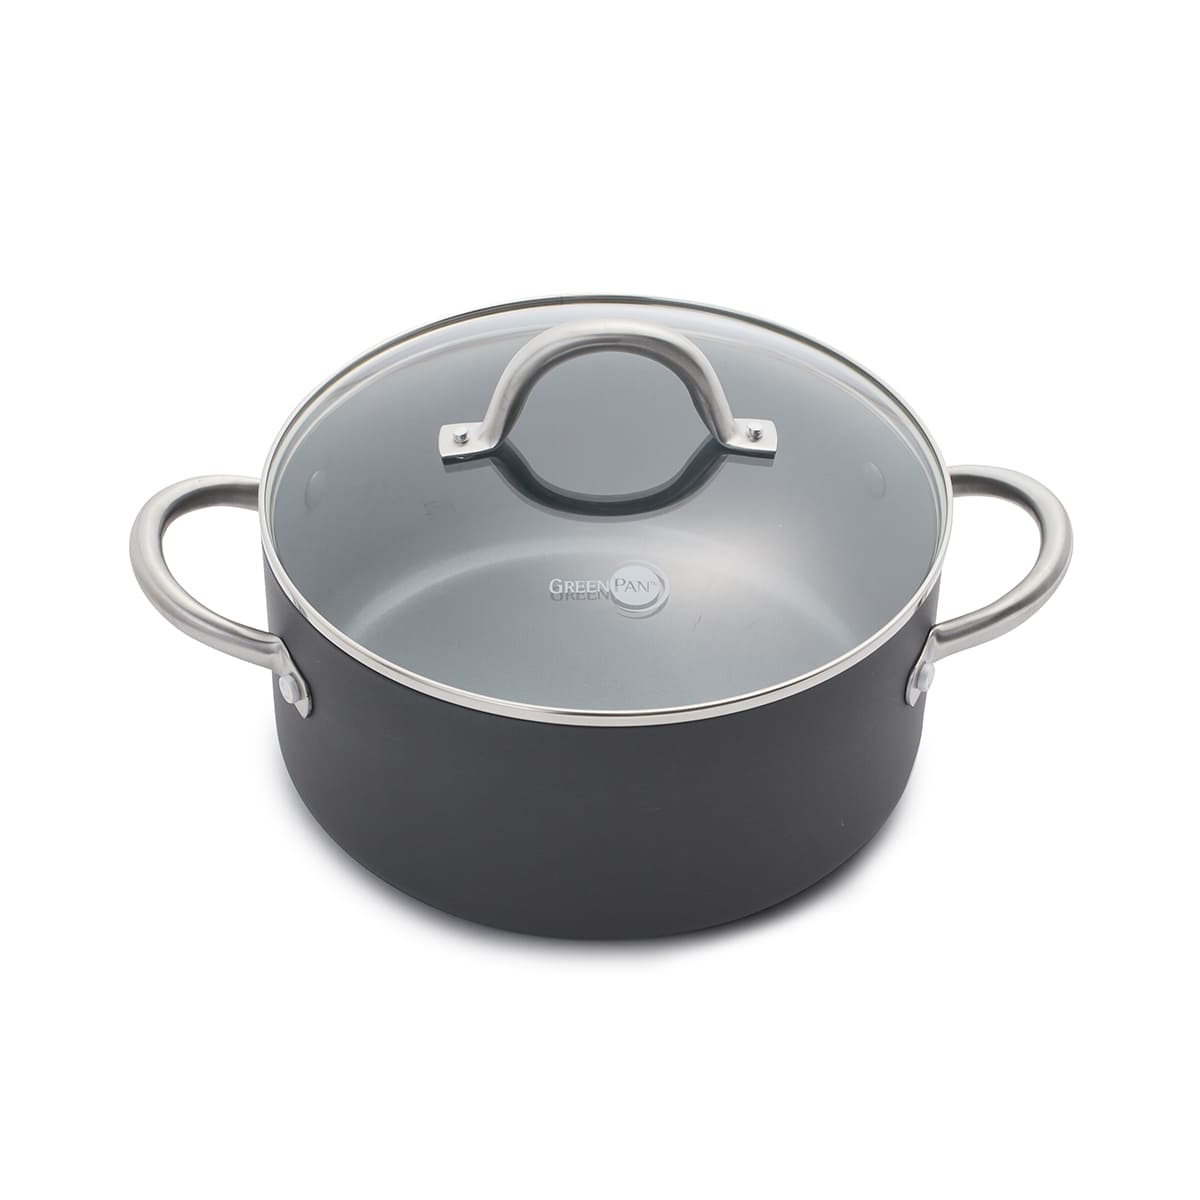 CW0004158 - Lima Lima Stock Pot With Lid, Grey - 24cm - Product Image 3